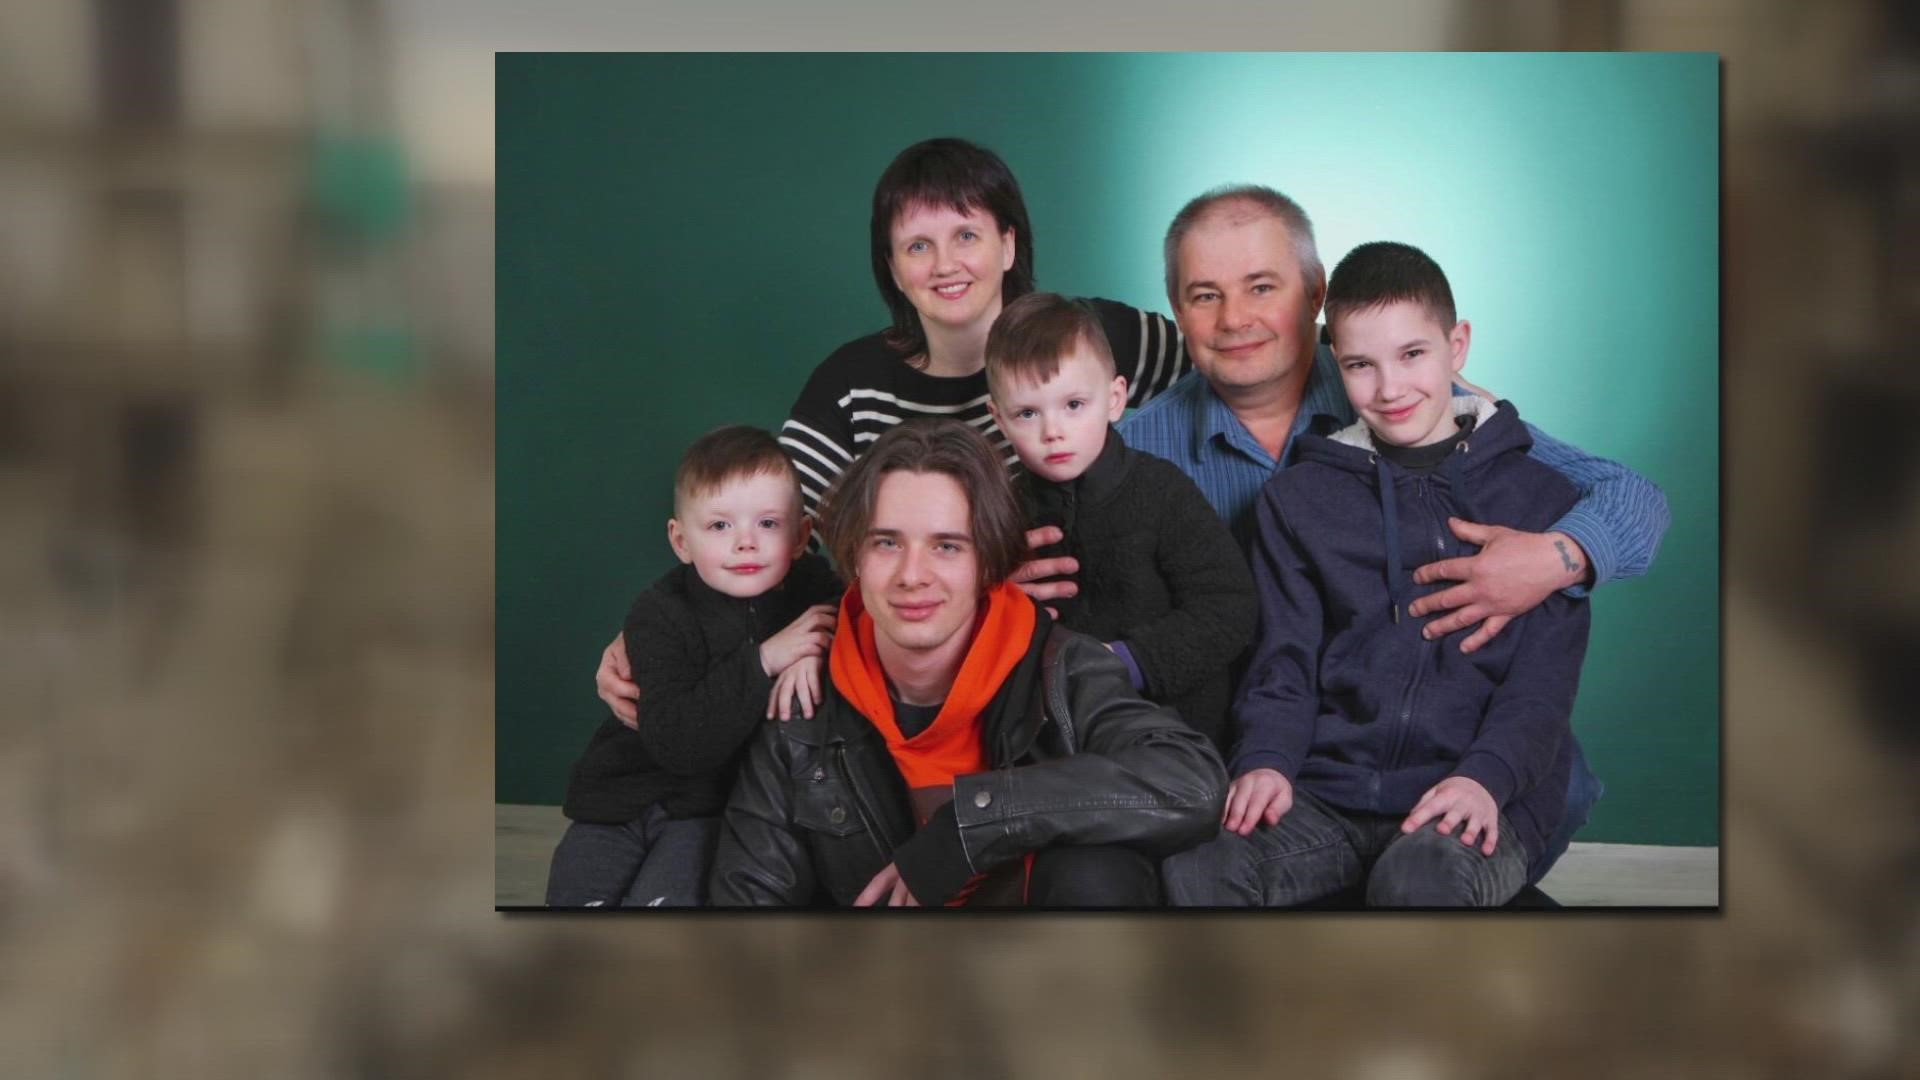 A woman from Broomfield is trying to get her family from Ukraine to Colorado, but it's been harder than she expected.